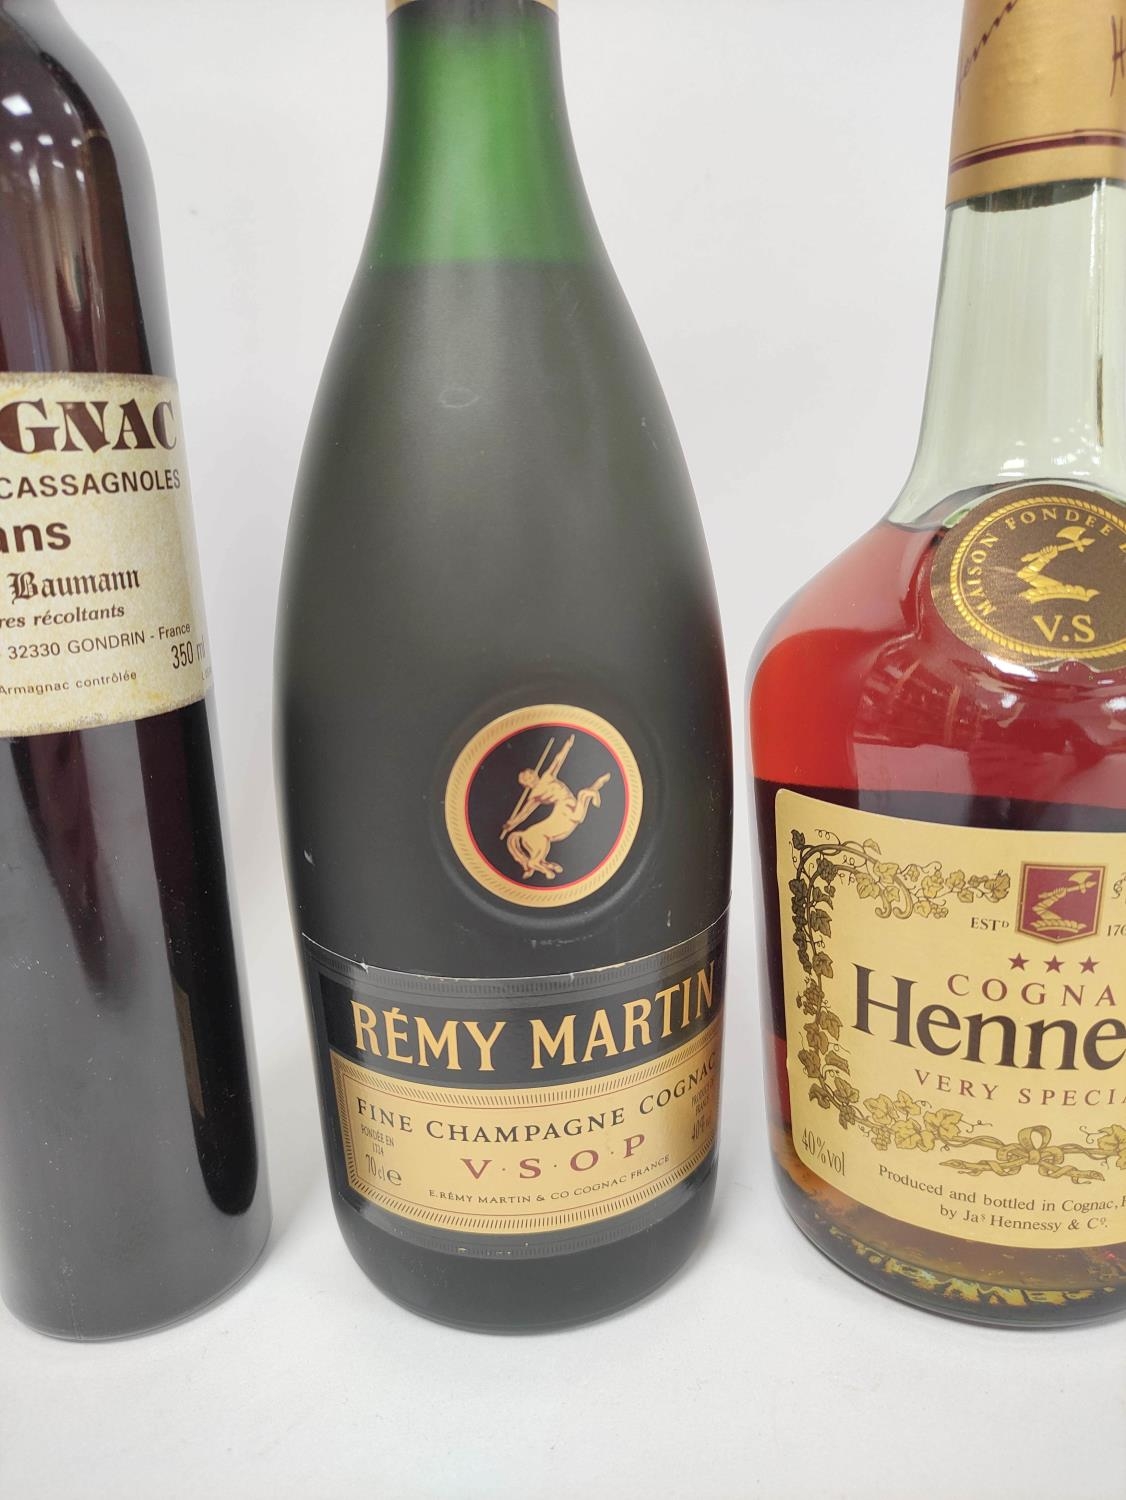 Hennessy very special cognac, 68cl, 40% vol, with Martell VS fine cognac, 70cl, 40% vol, Remy Martin - Image 4 of 5